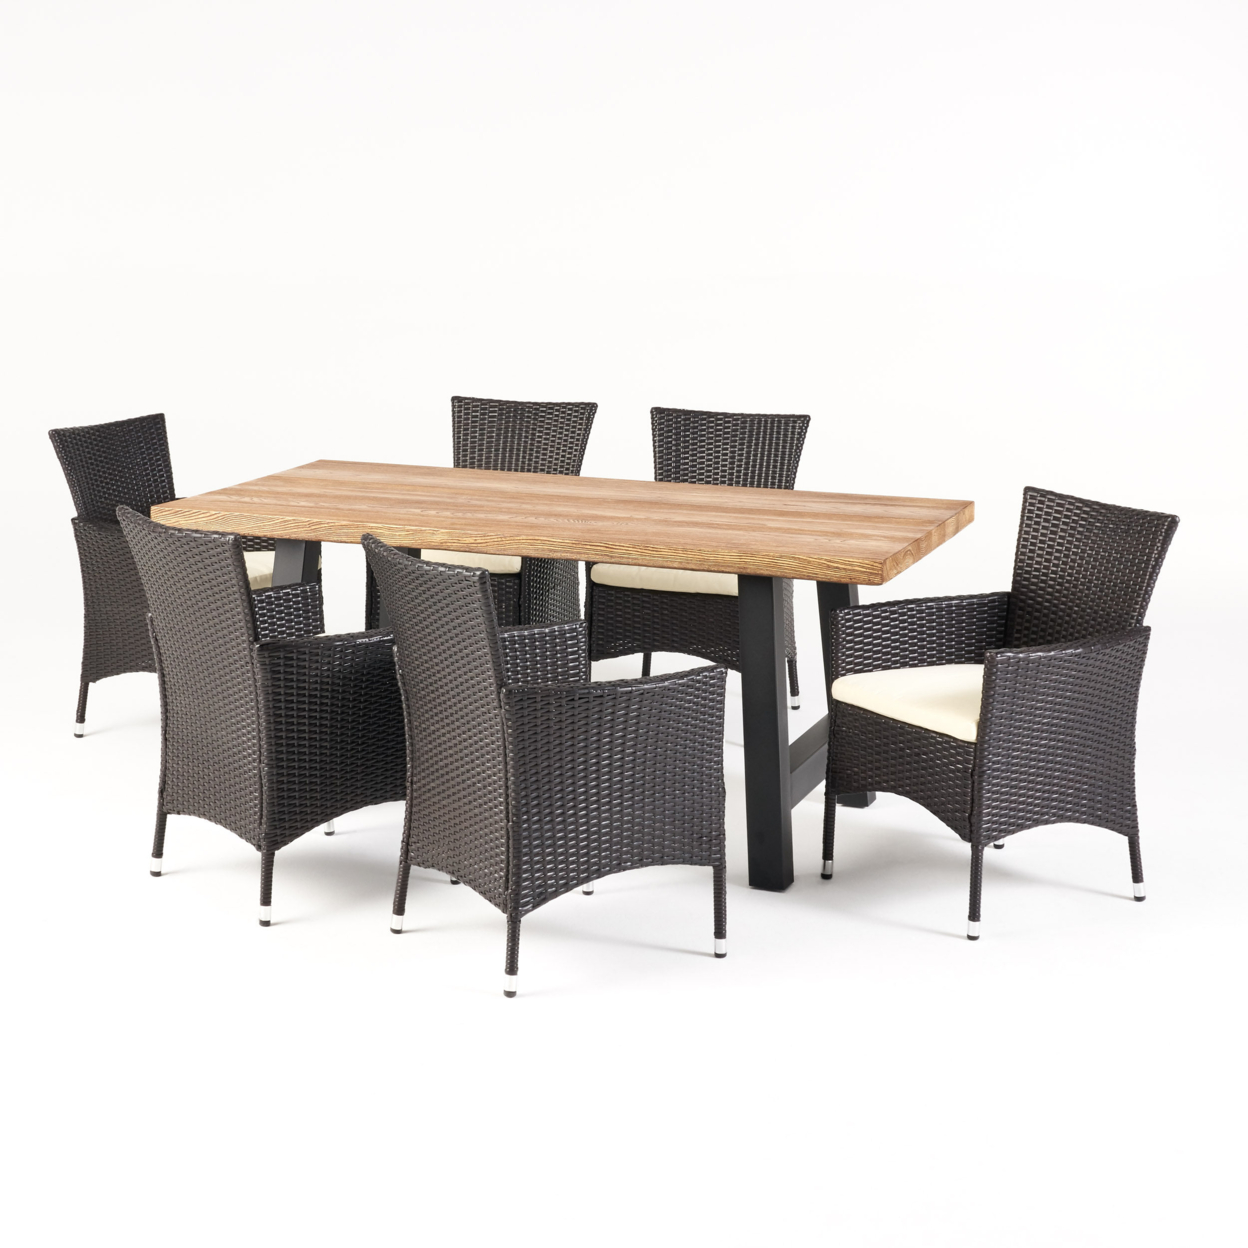 Sina Outdoor 7 Piece Wicker Dining Set With Light Weight Concrete Table And Water Resistant Cushions